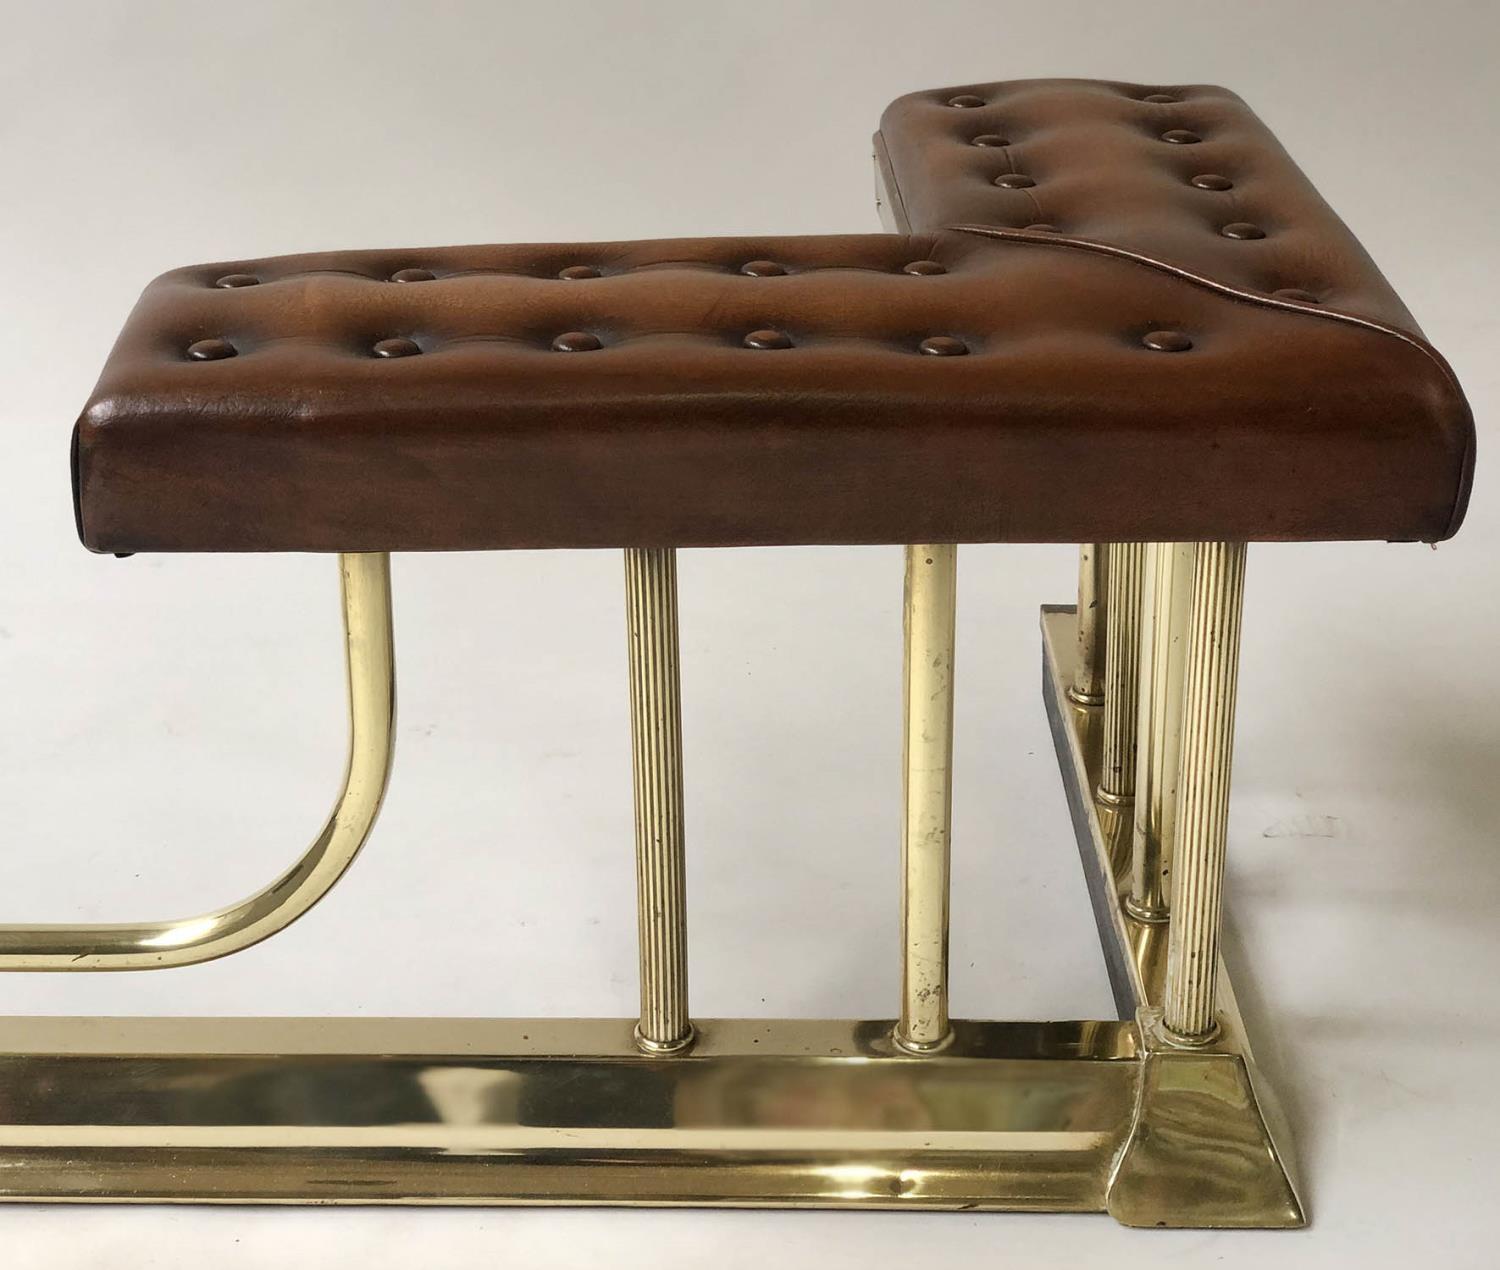 CLUB FENDER, Victorian style brass with buttoned brown leather pads and balustrade support, 140cm - Image 2 of 6